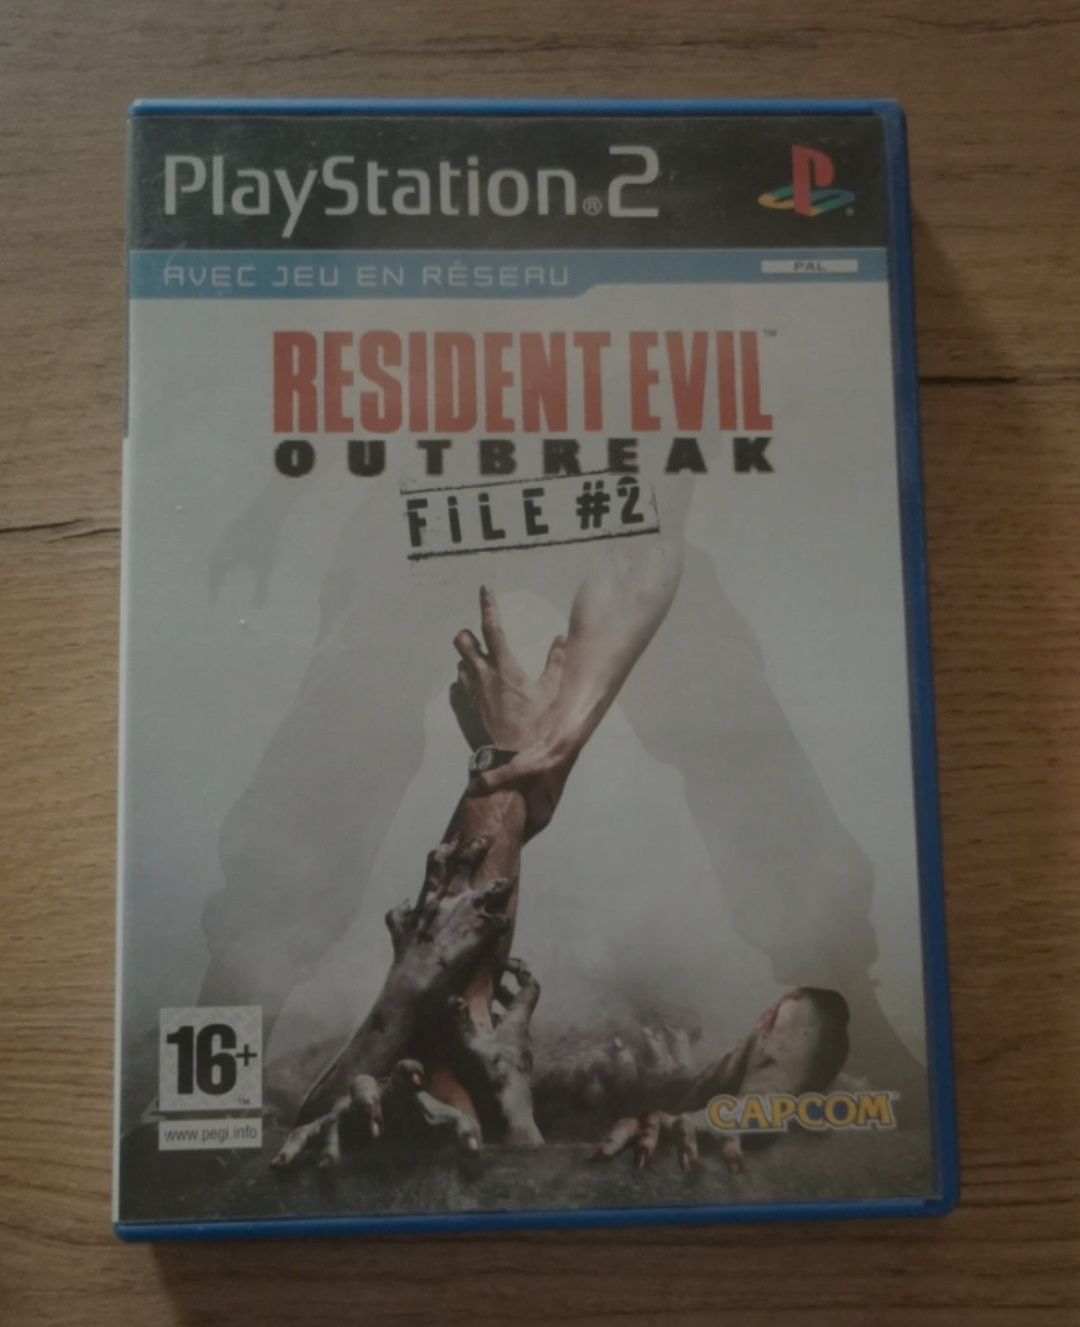 Ps2 resident evil outbreak file #2 PlayStation ps1 psx pstwo  ps3